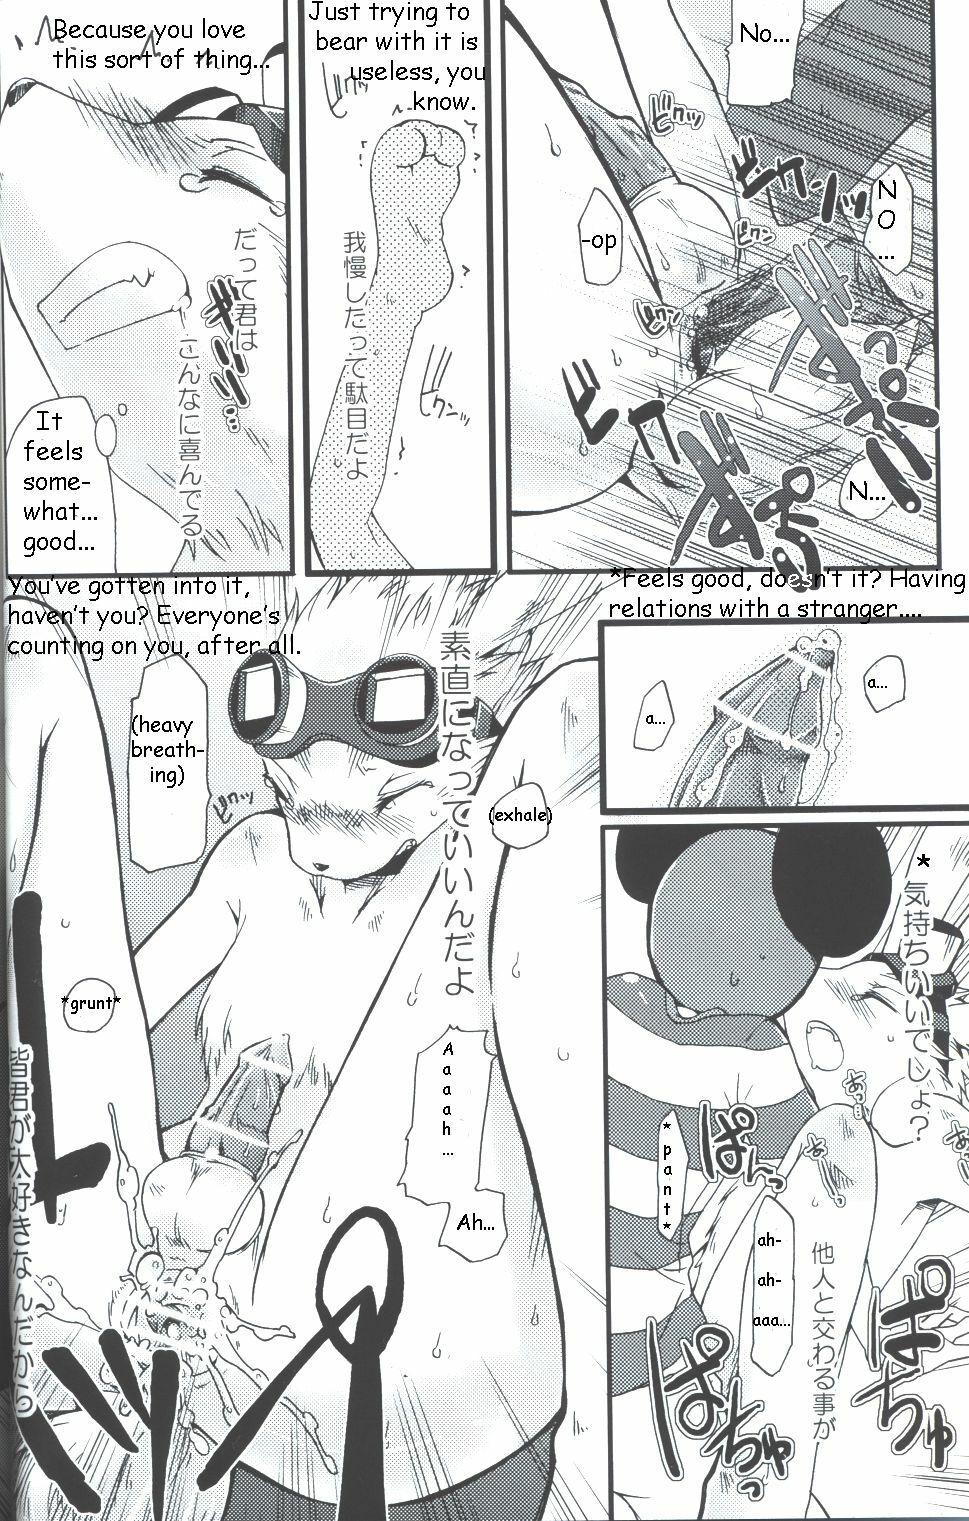 [Dogear (Inumimi Moeta)] Requirements of the King (Summer Wars) [English] page 14 full